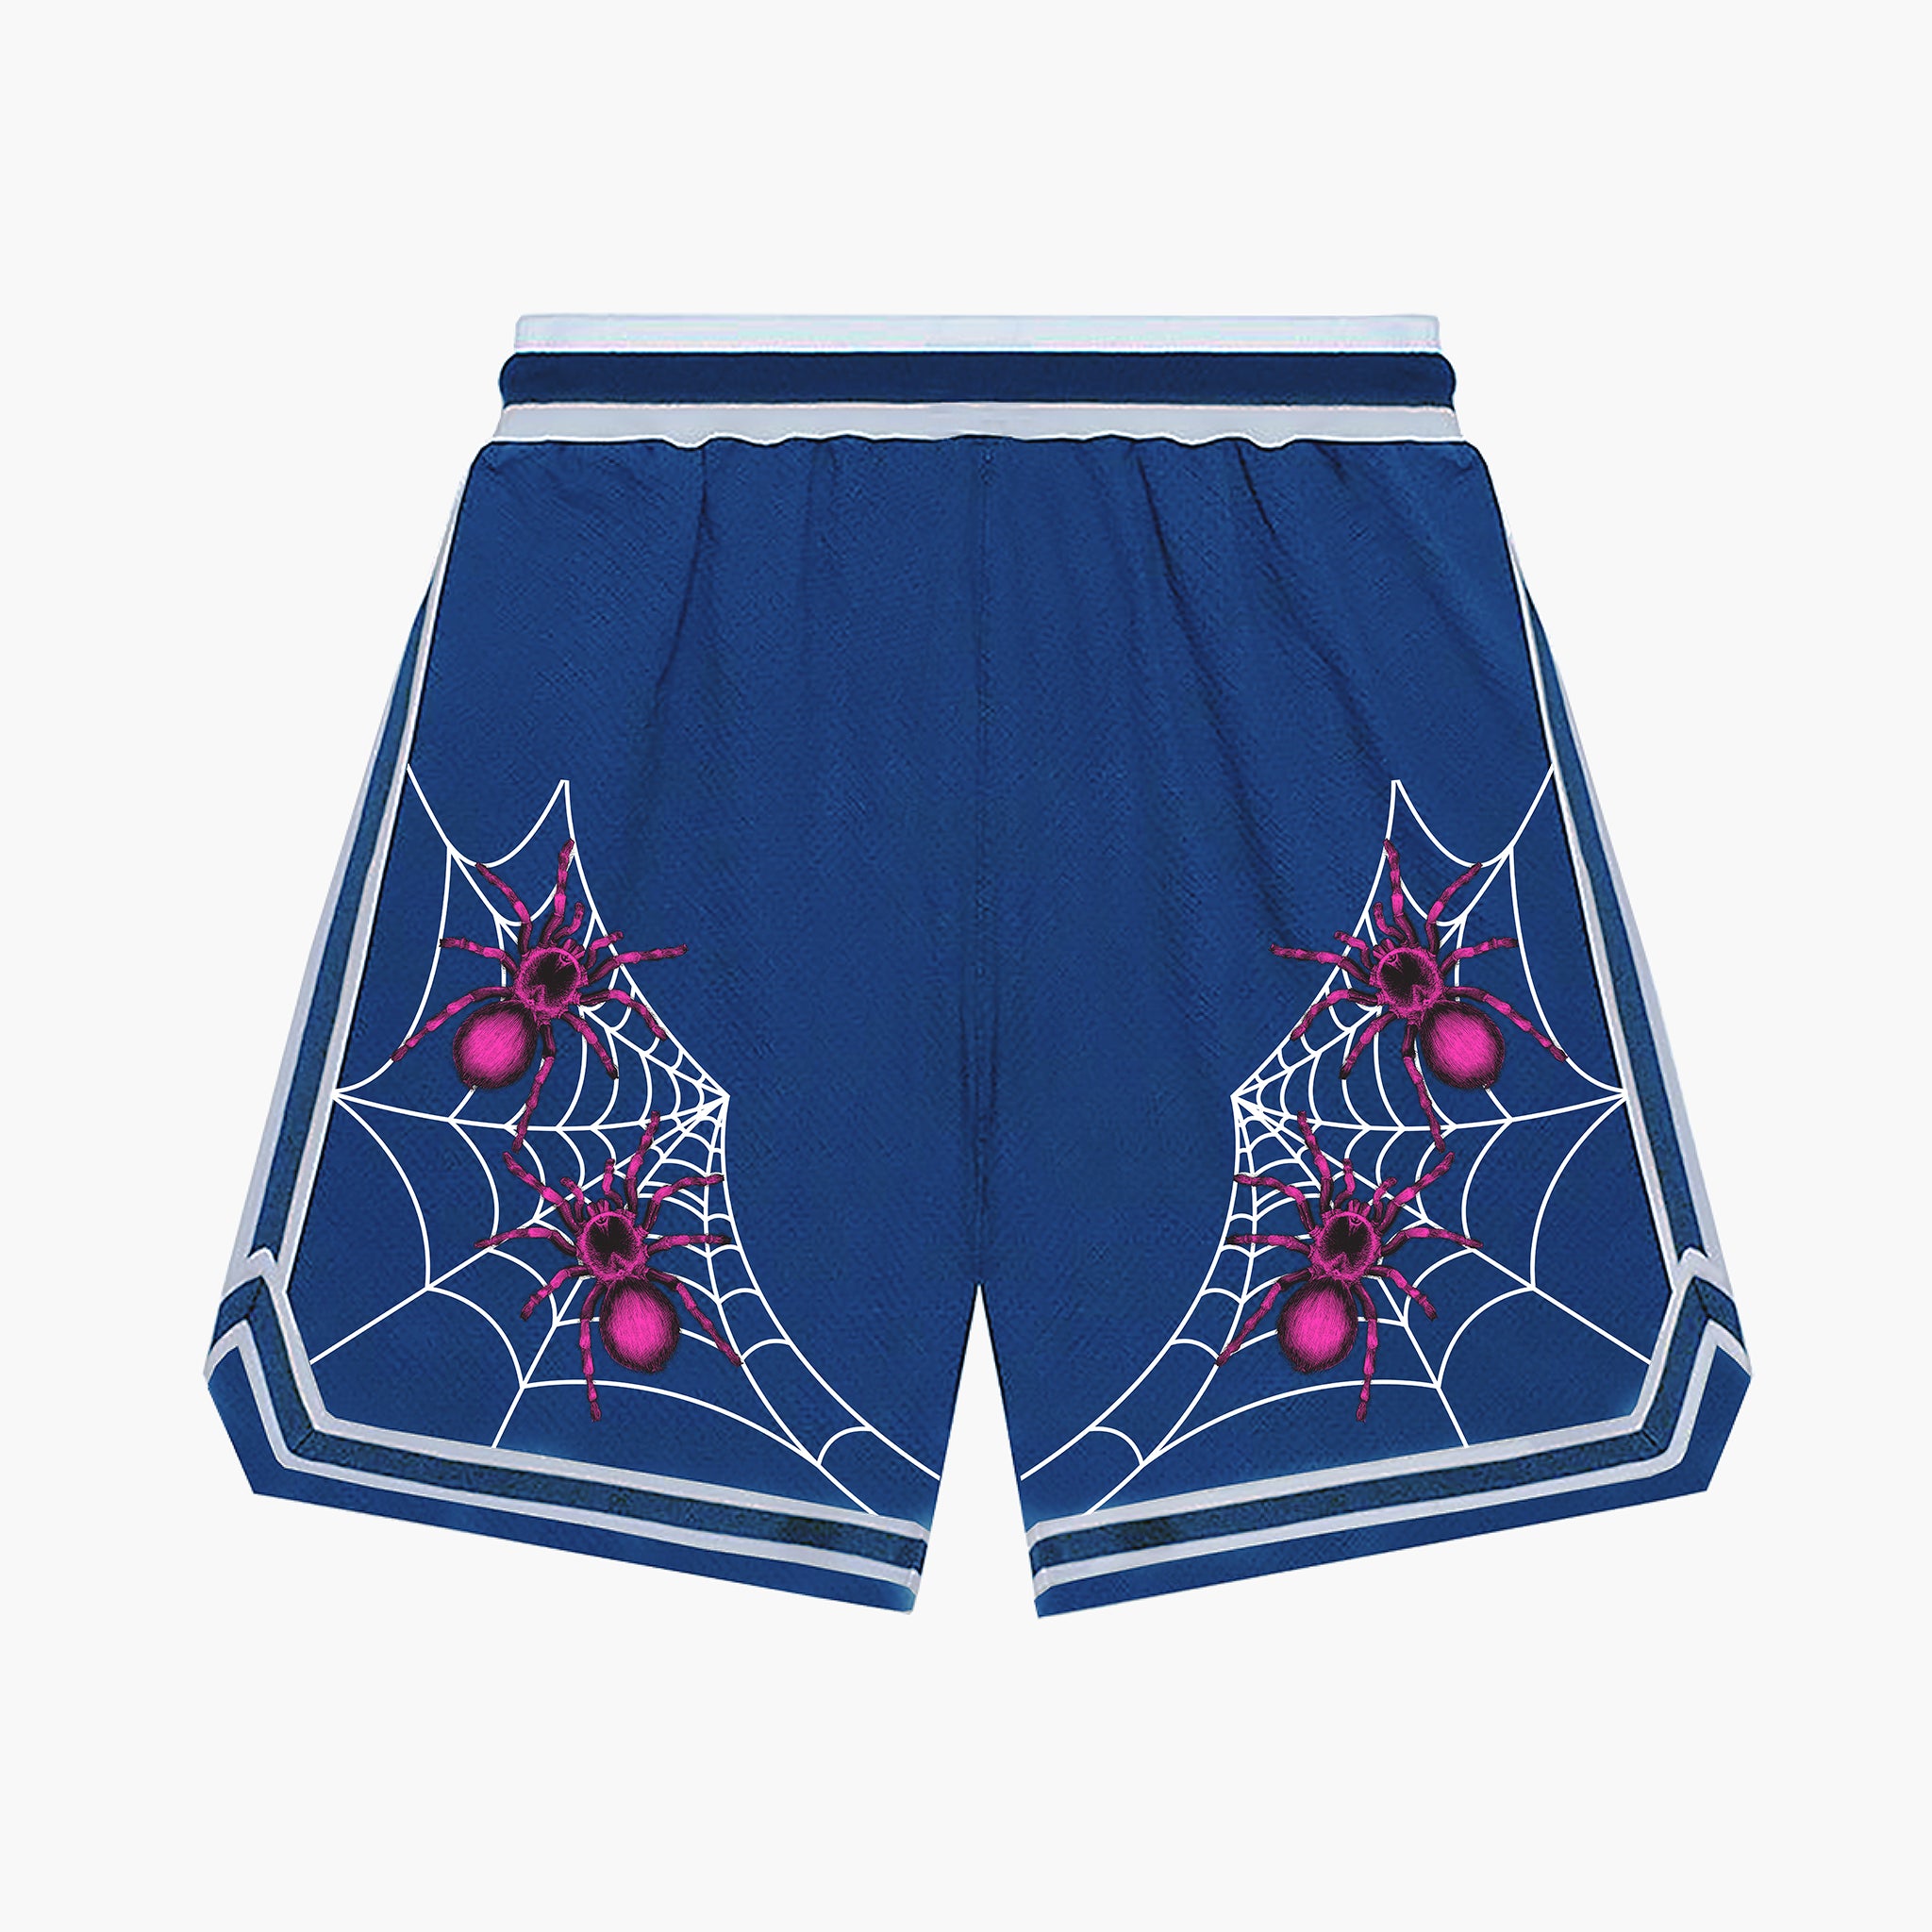 Mojave Basketball Shorts - Frequently Asked Questions